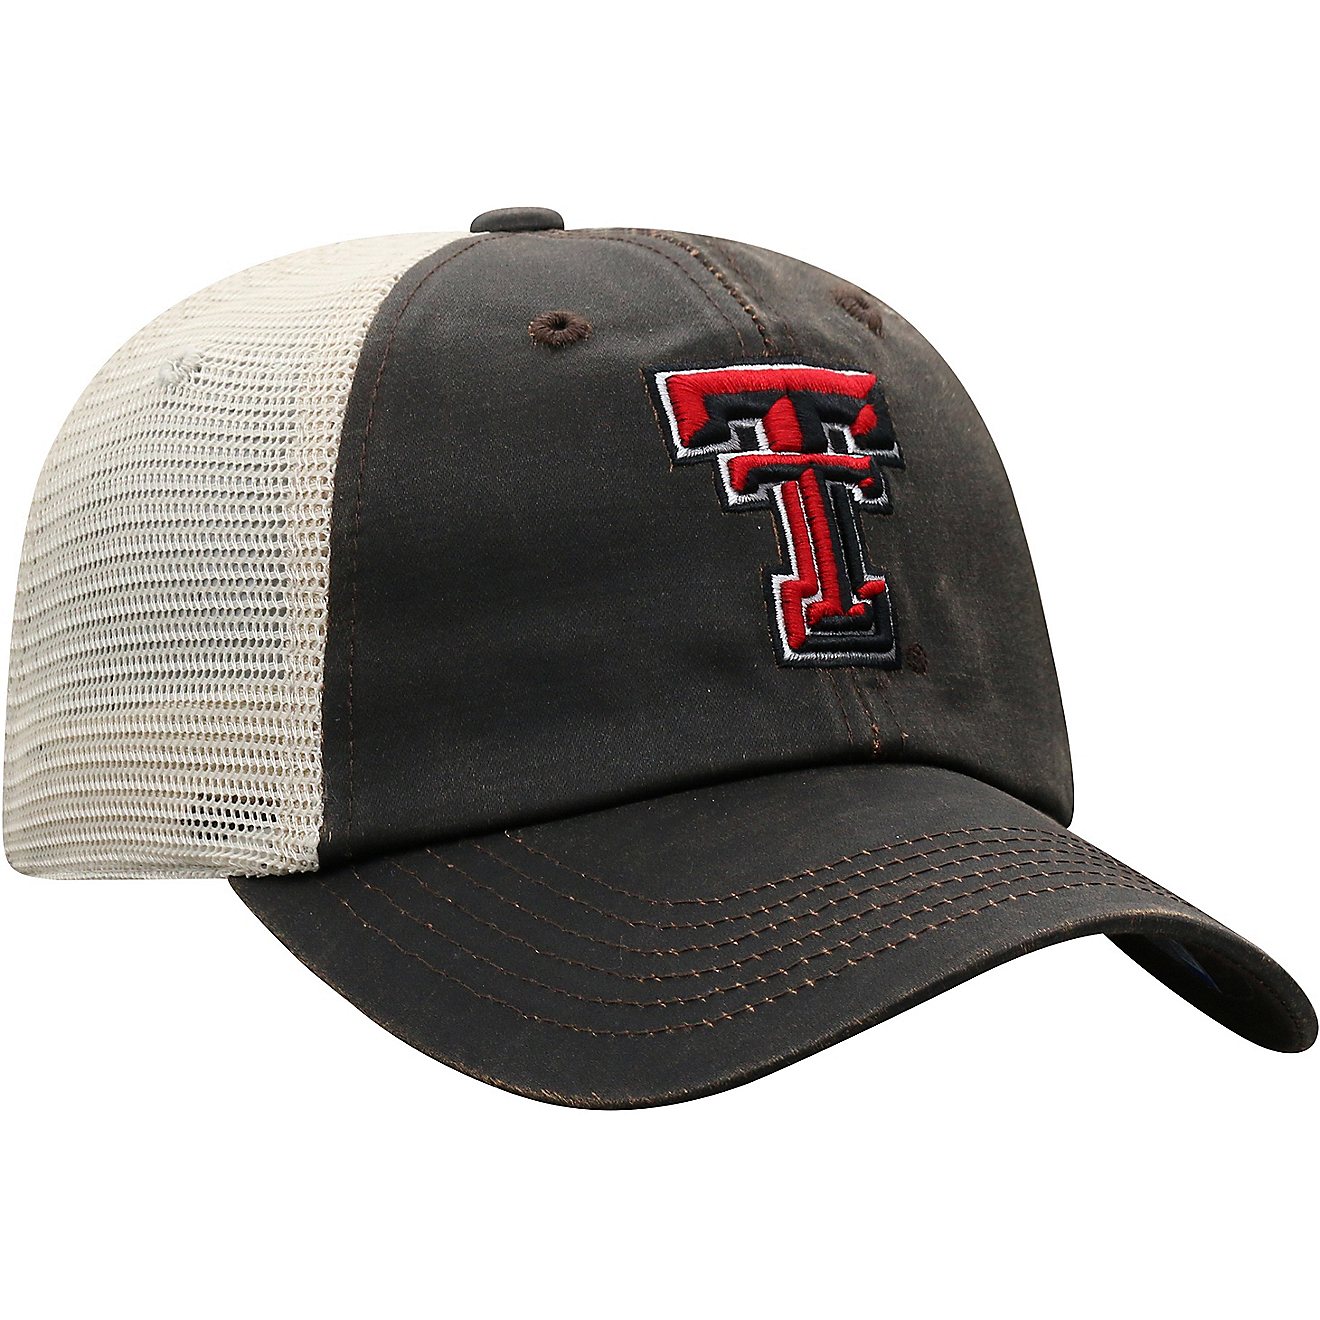 Top of the World Adults' Texas Tech University ScatMesh Cap                                                                      - view number 3